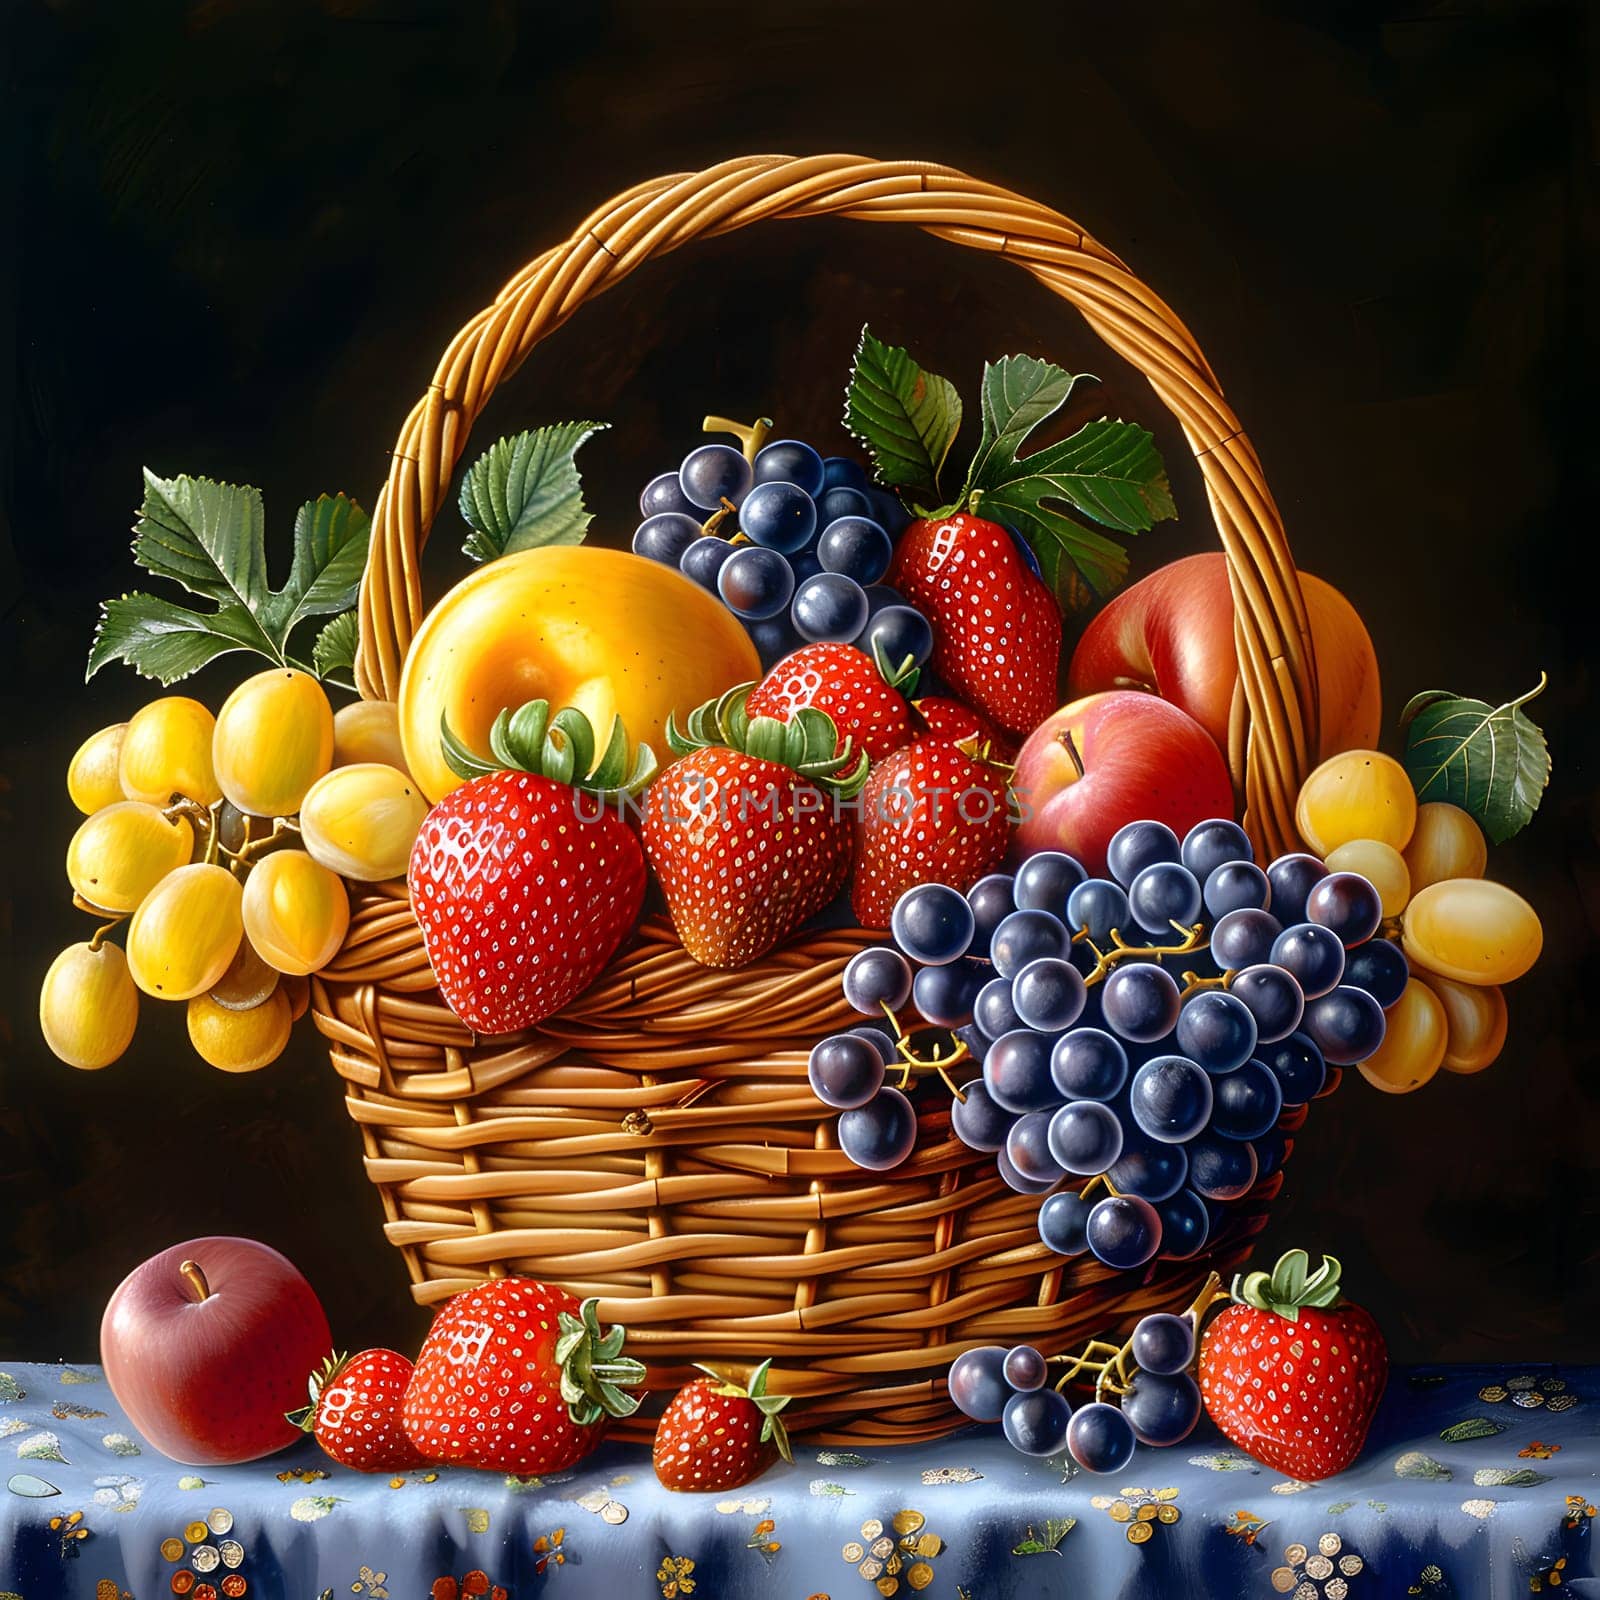 A beautifully arranged basket filled with a variety of fruits such as strawberries, grapes, and apples. The perfect combination of natural foods for a healthy and delicious snack